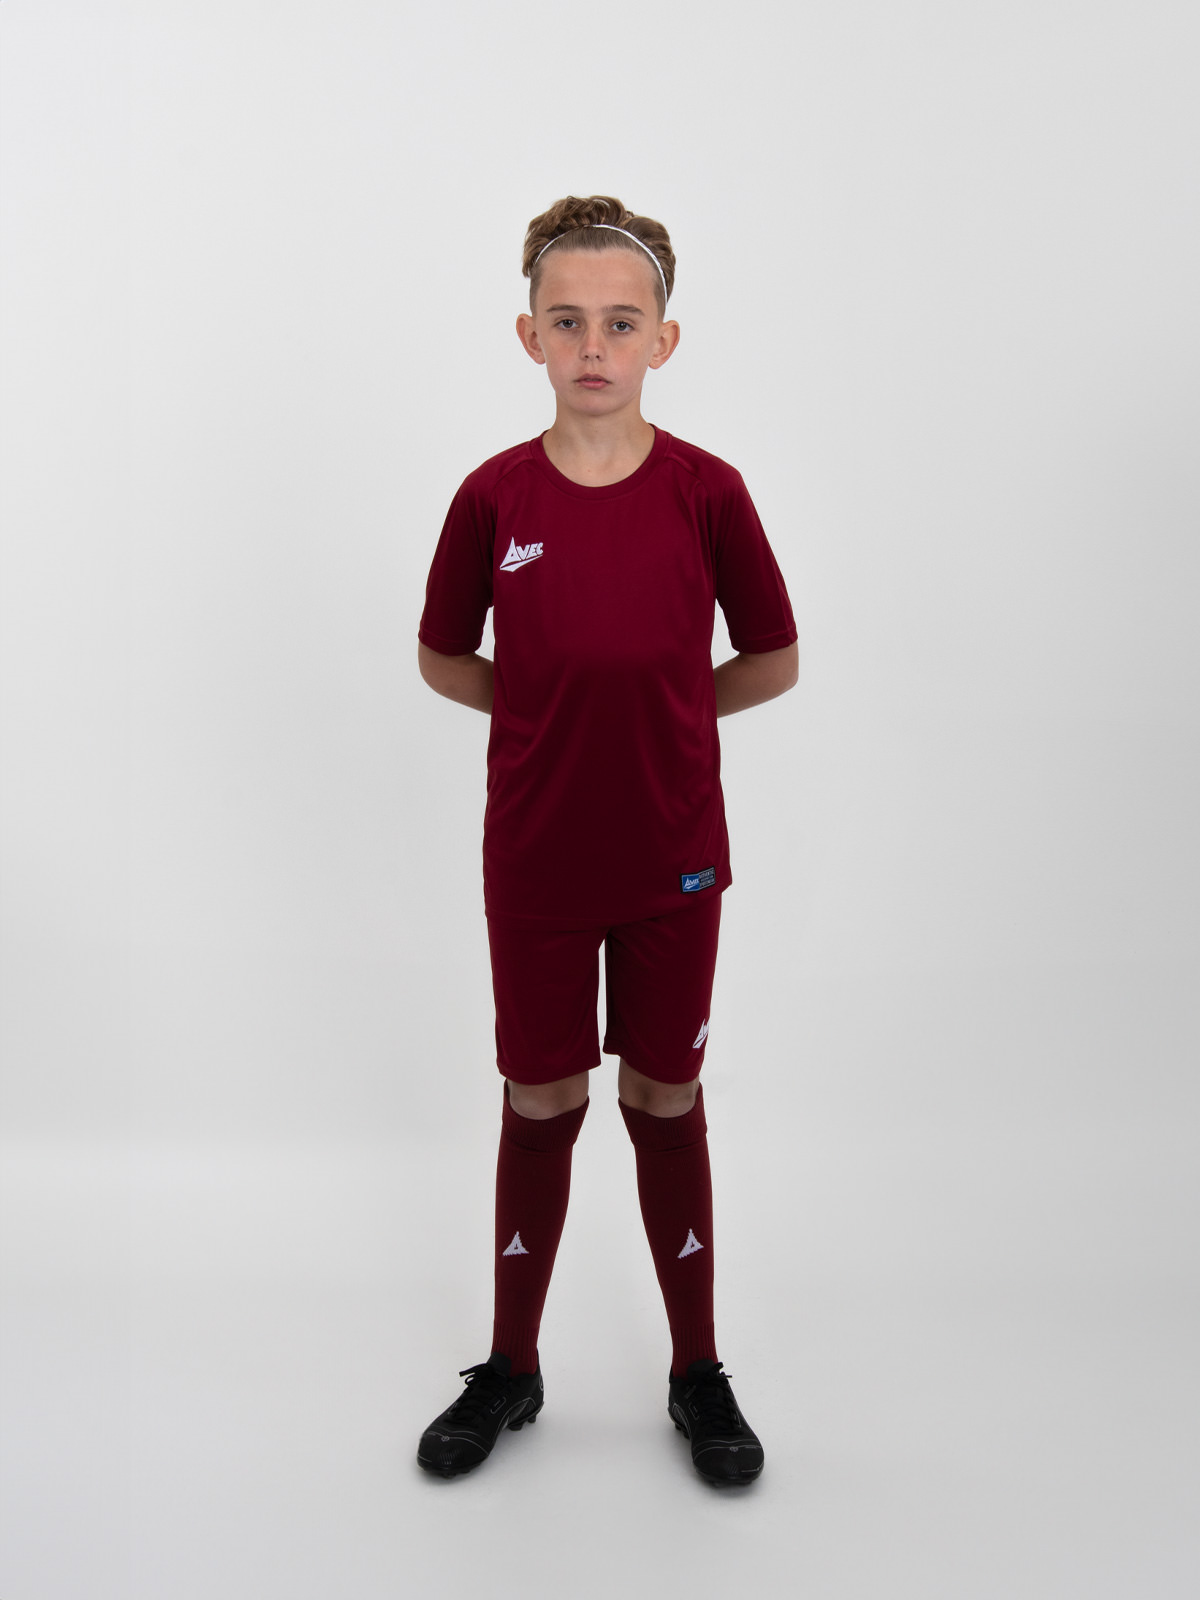 a child is wearing a full plain claret football kit